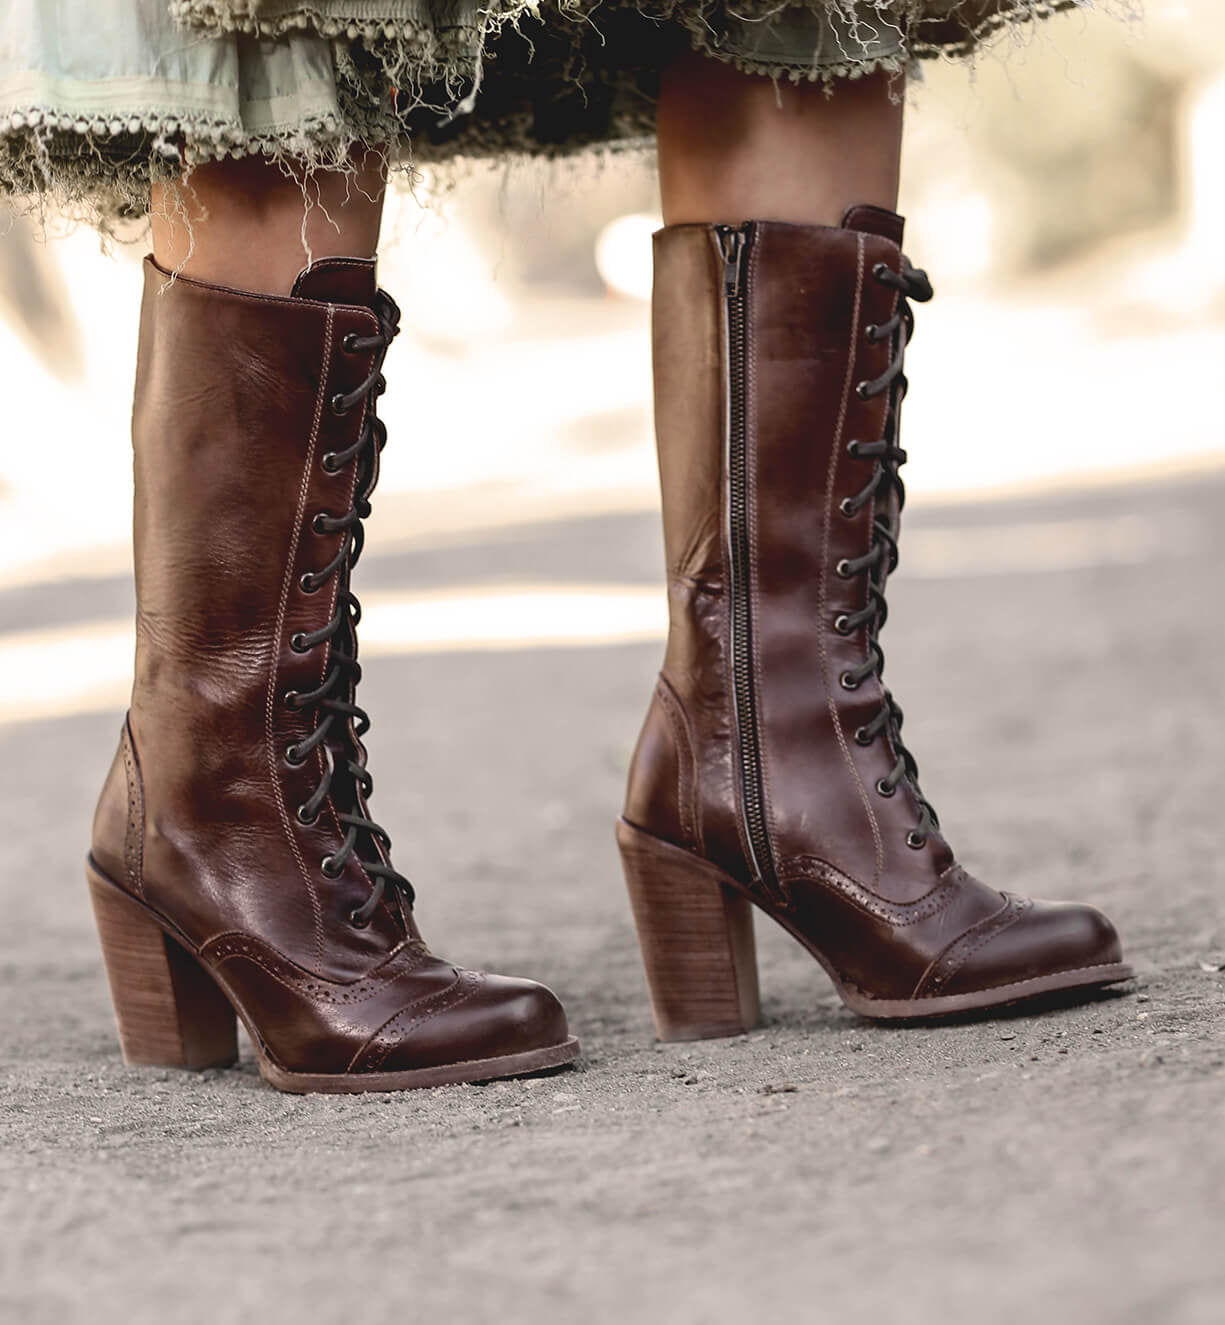 A woman wearing Oak Tree Farms' Ariana leather boots and a skirt.